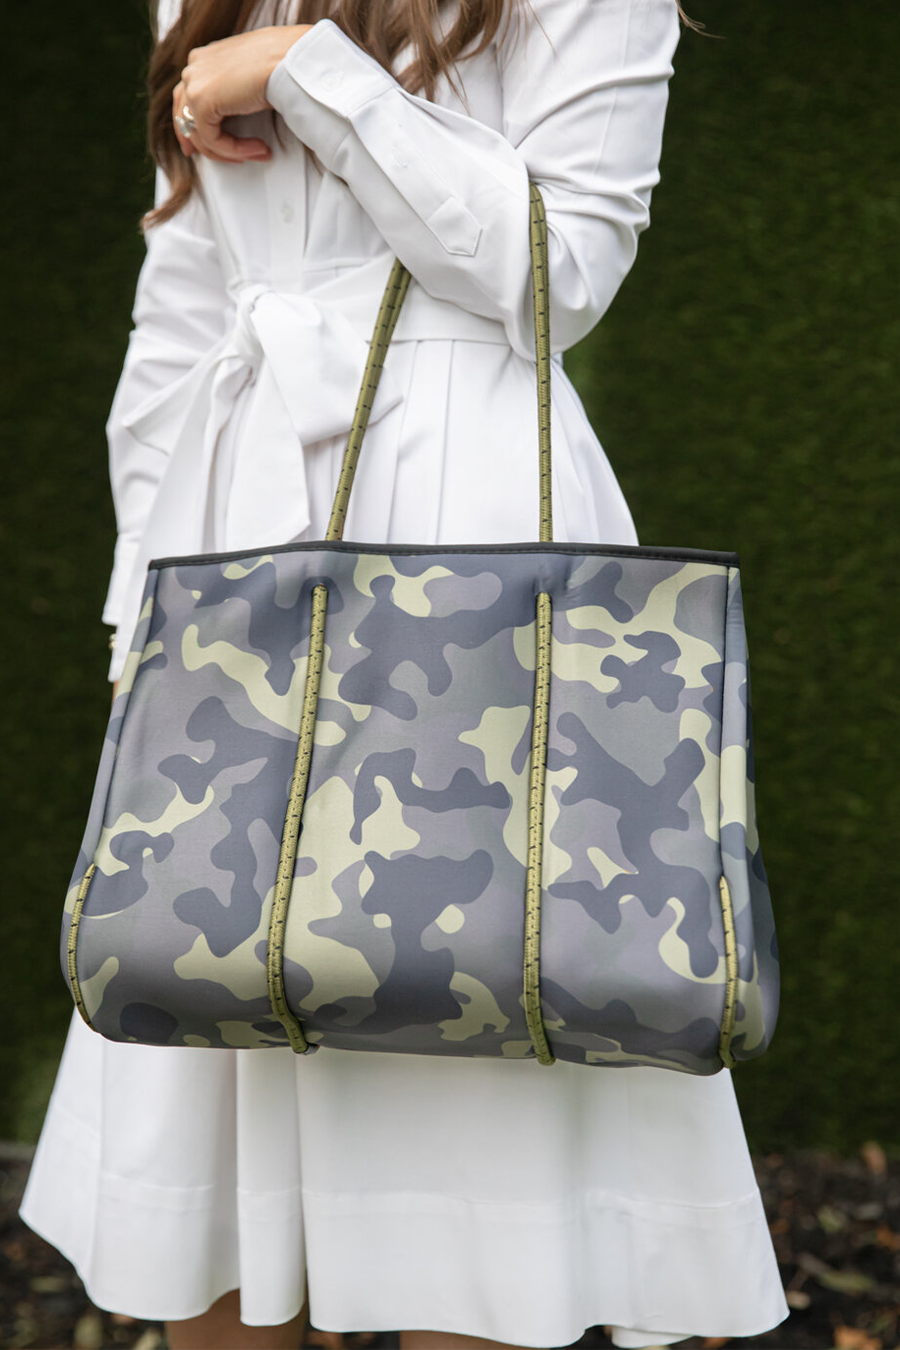 Neoprene Tote | Solid Camo - Main Image Number 1 of 2